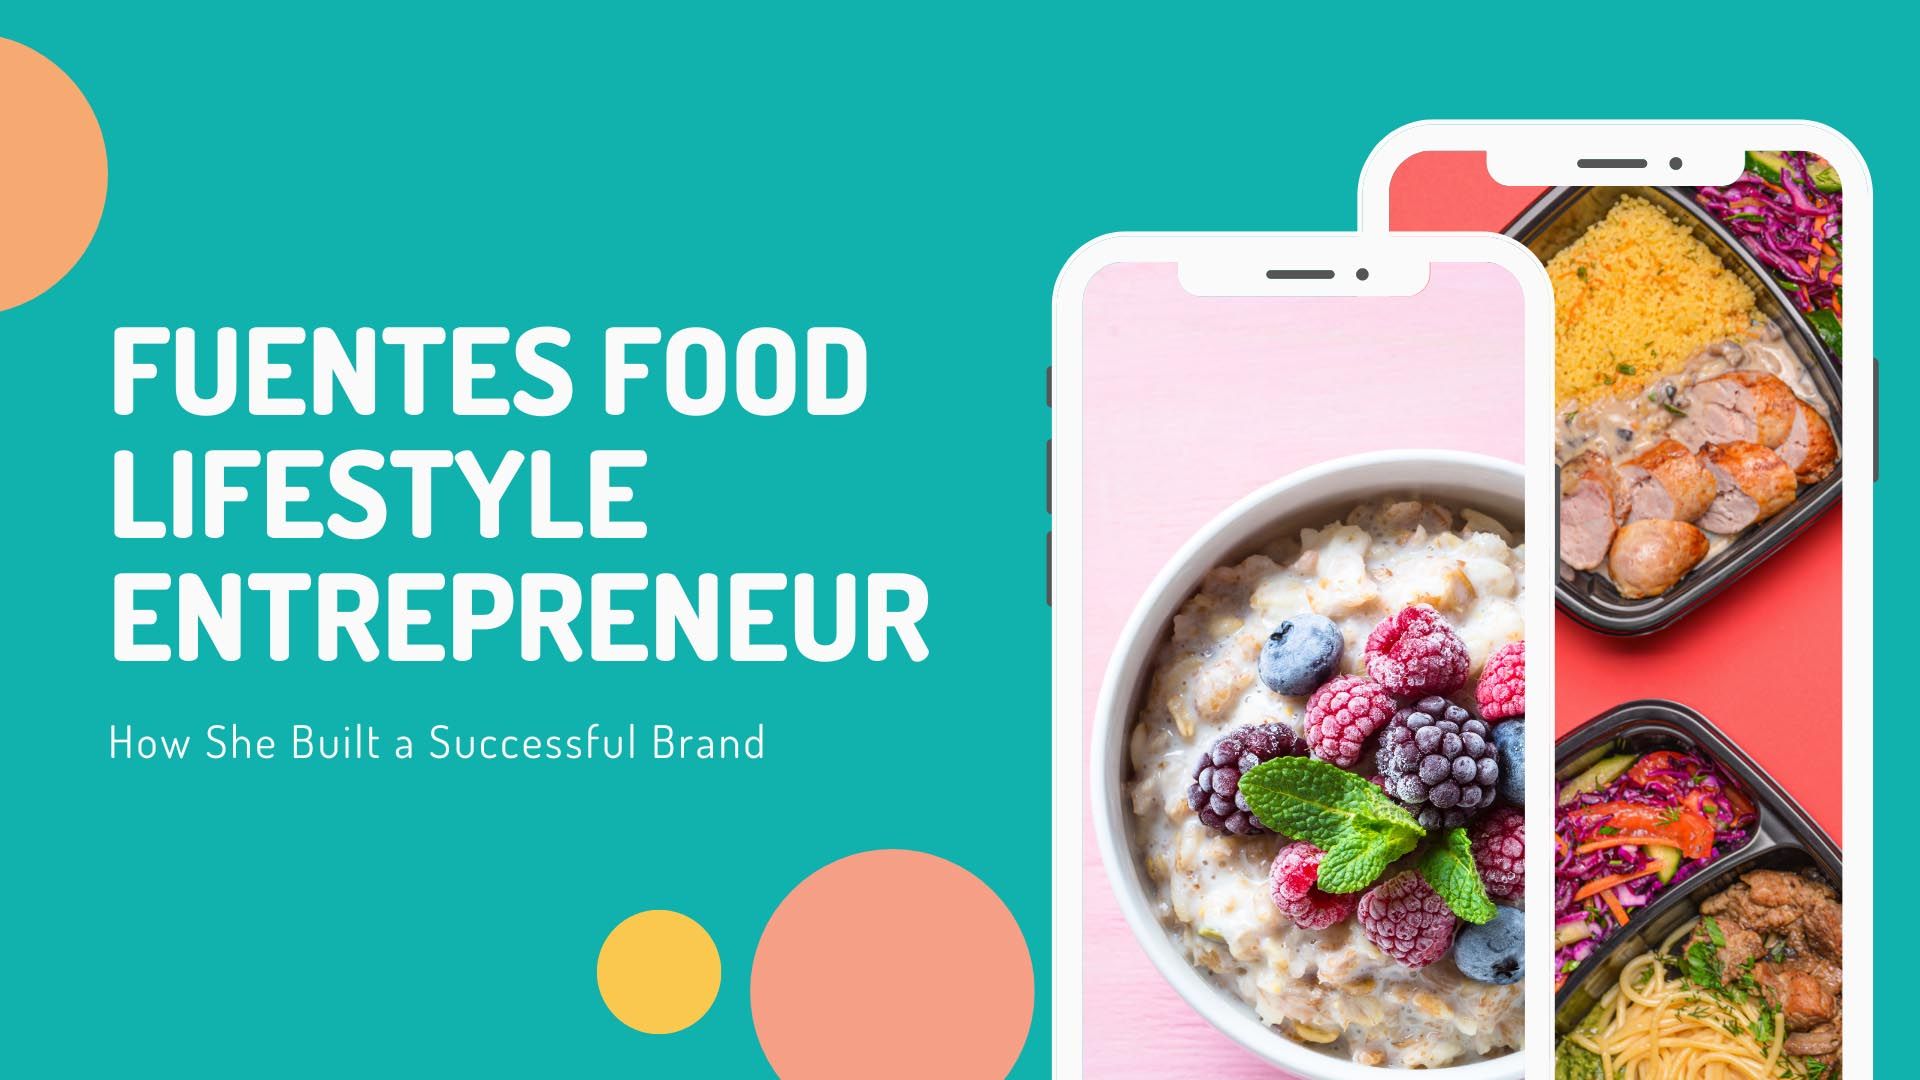 A Fuentes Food Lifestyle Entrepreneur: How She Built a Successful Brand